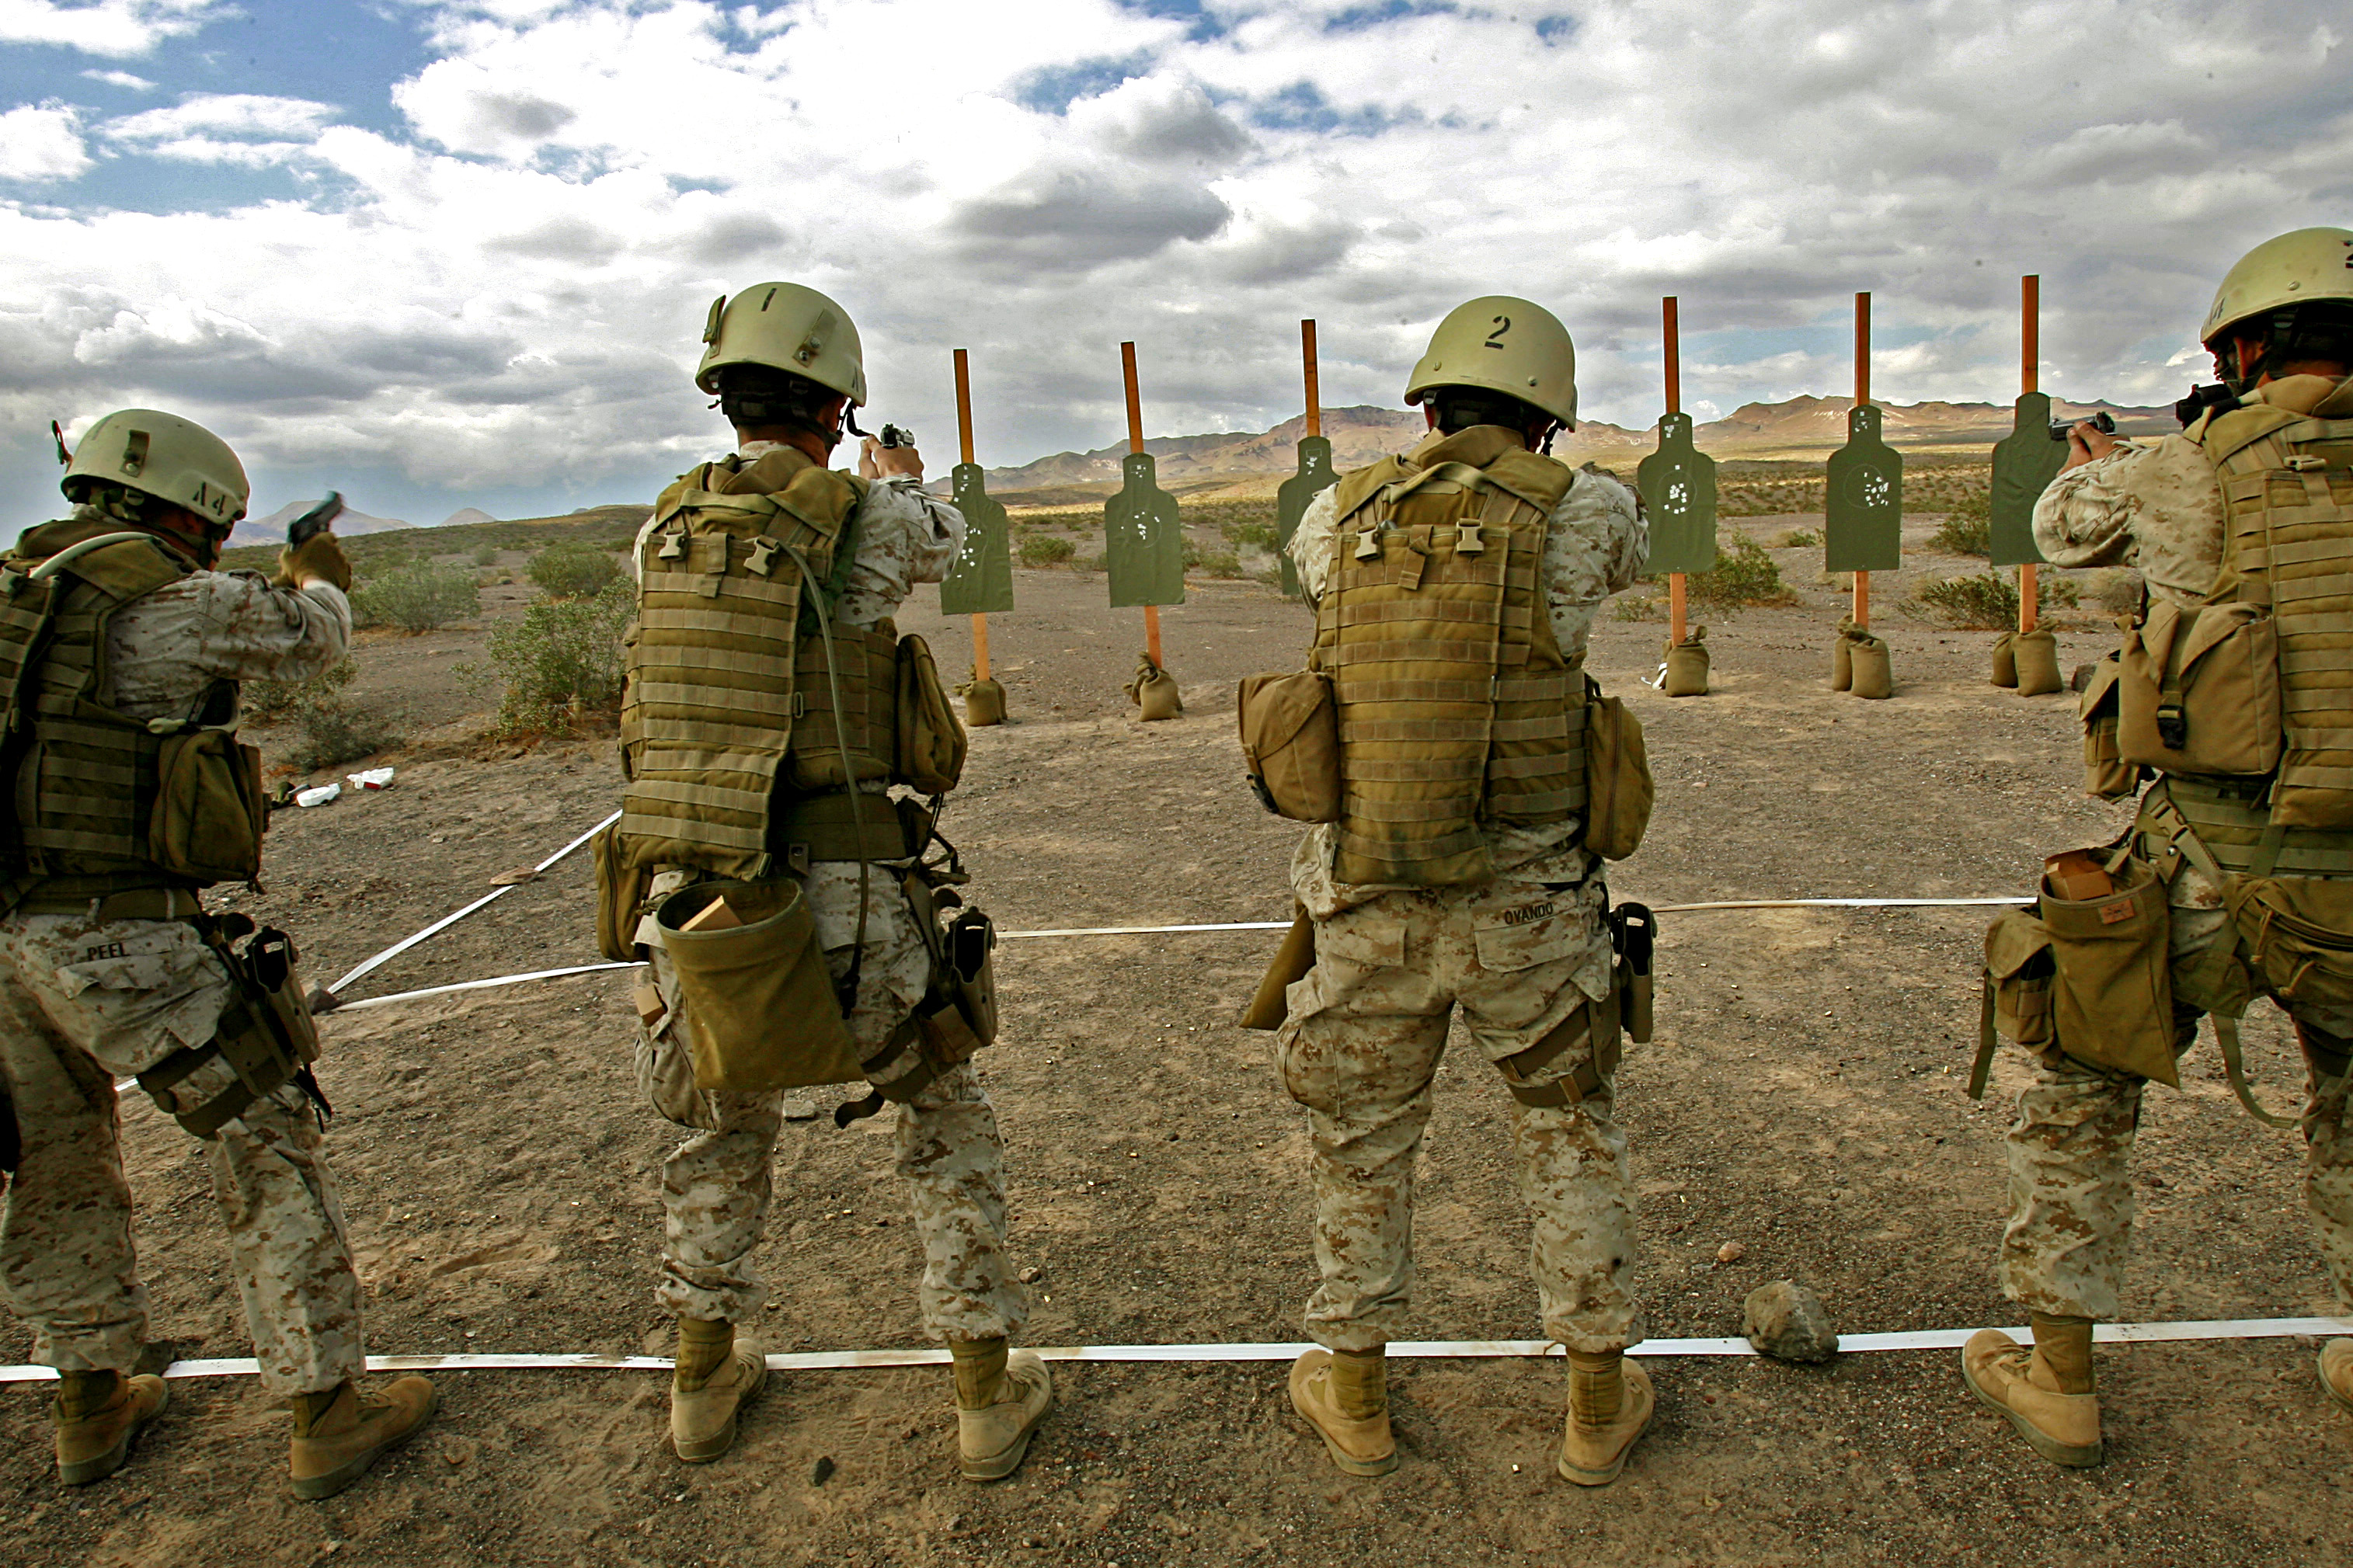 Stock Photo Of American Soldiers Marines Shooting At Targets   Acclaim